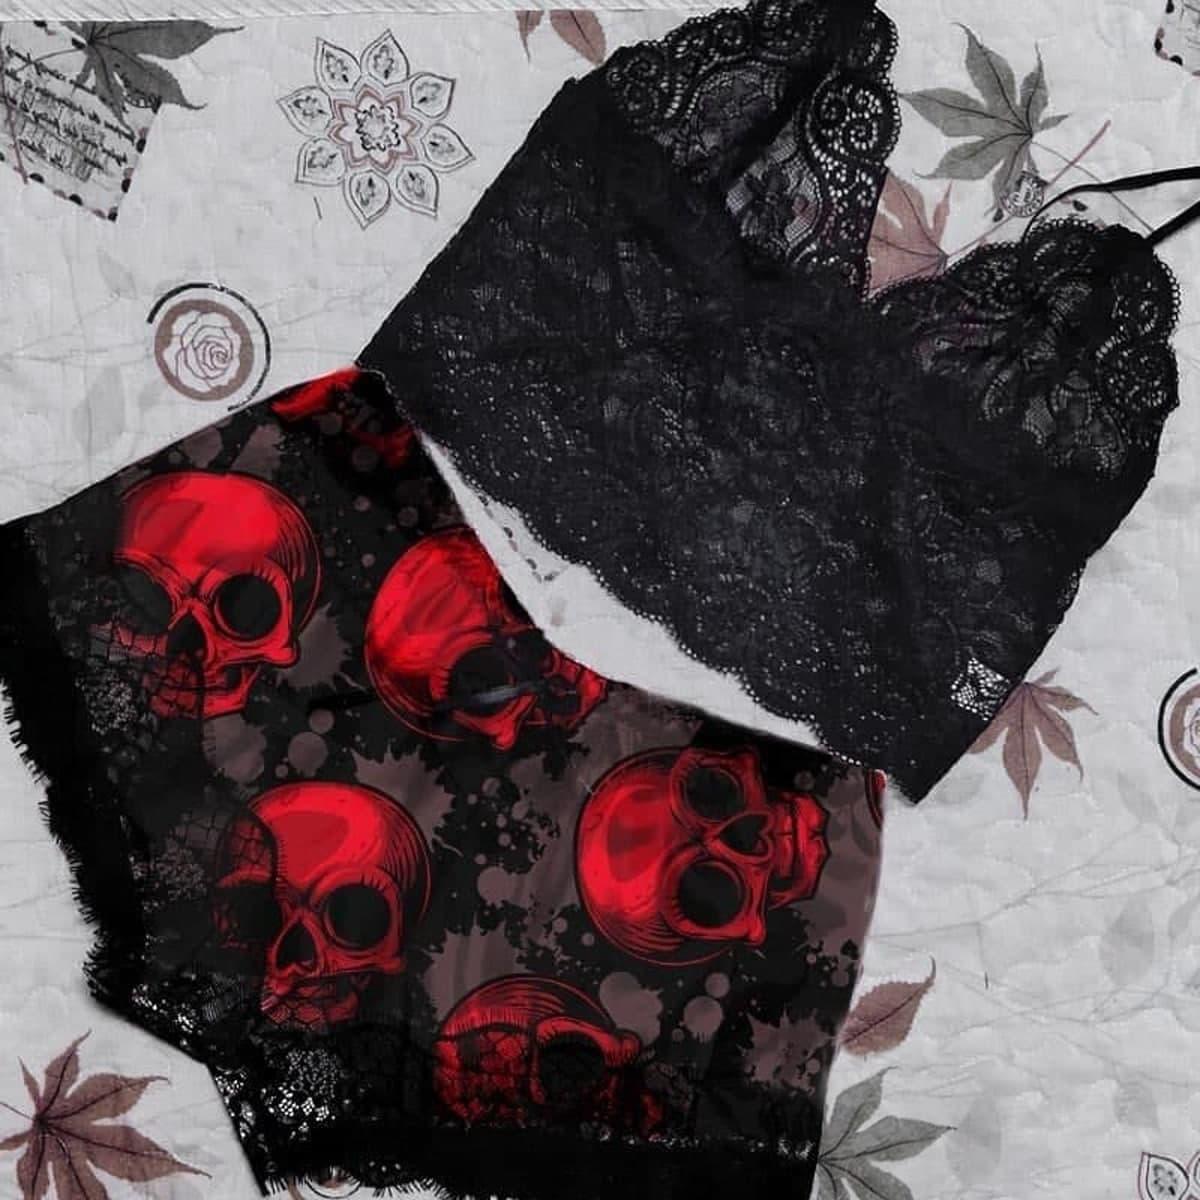 A gothic lingerie set featuring a red skull design on a black lace background.